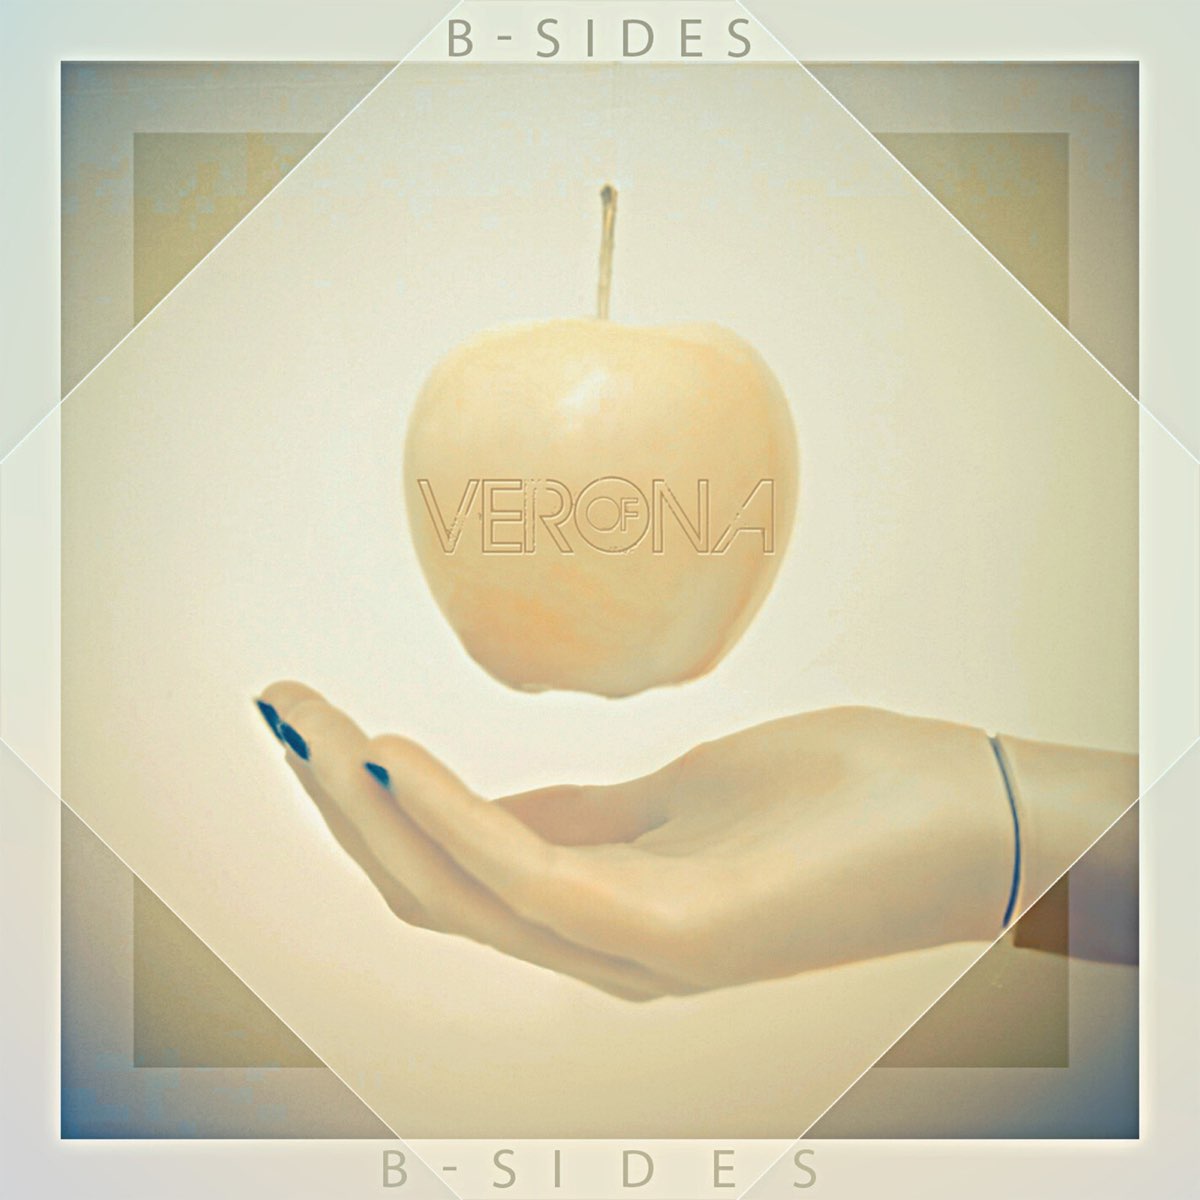 ‎The White Apple: B-Sides by of Verona on Apple Music